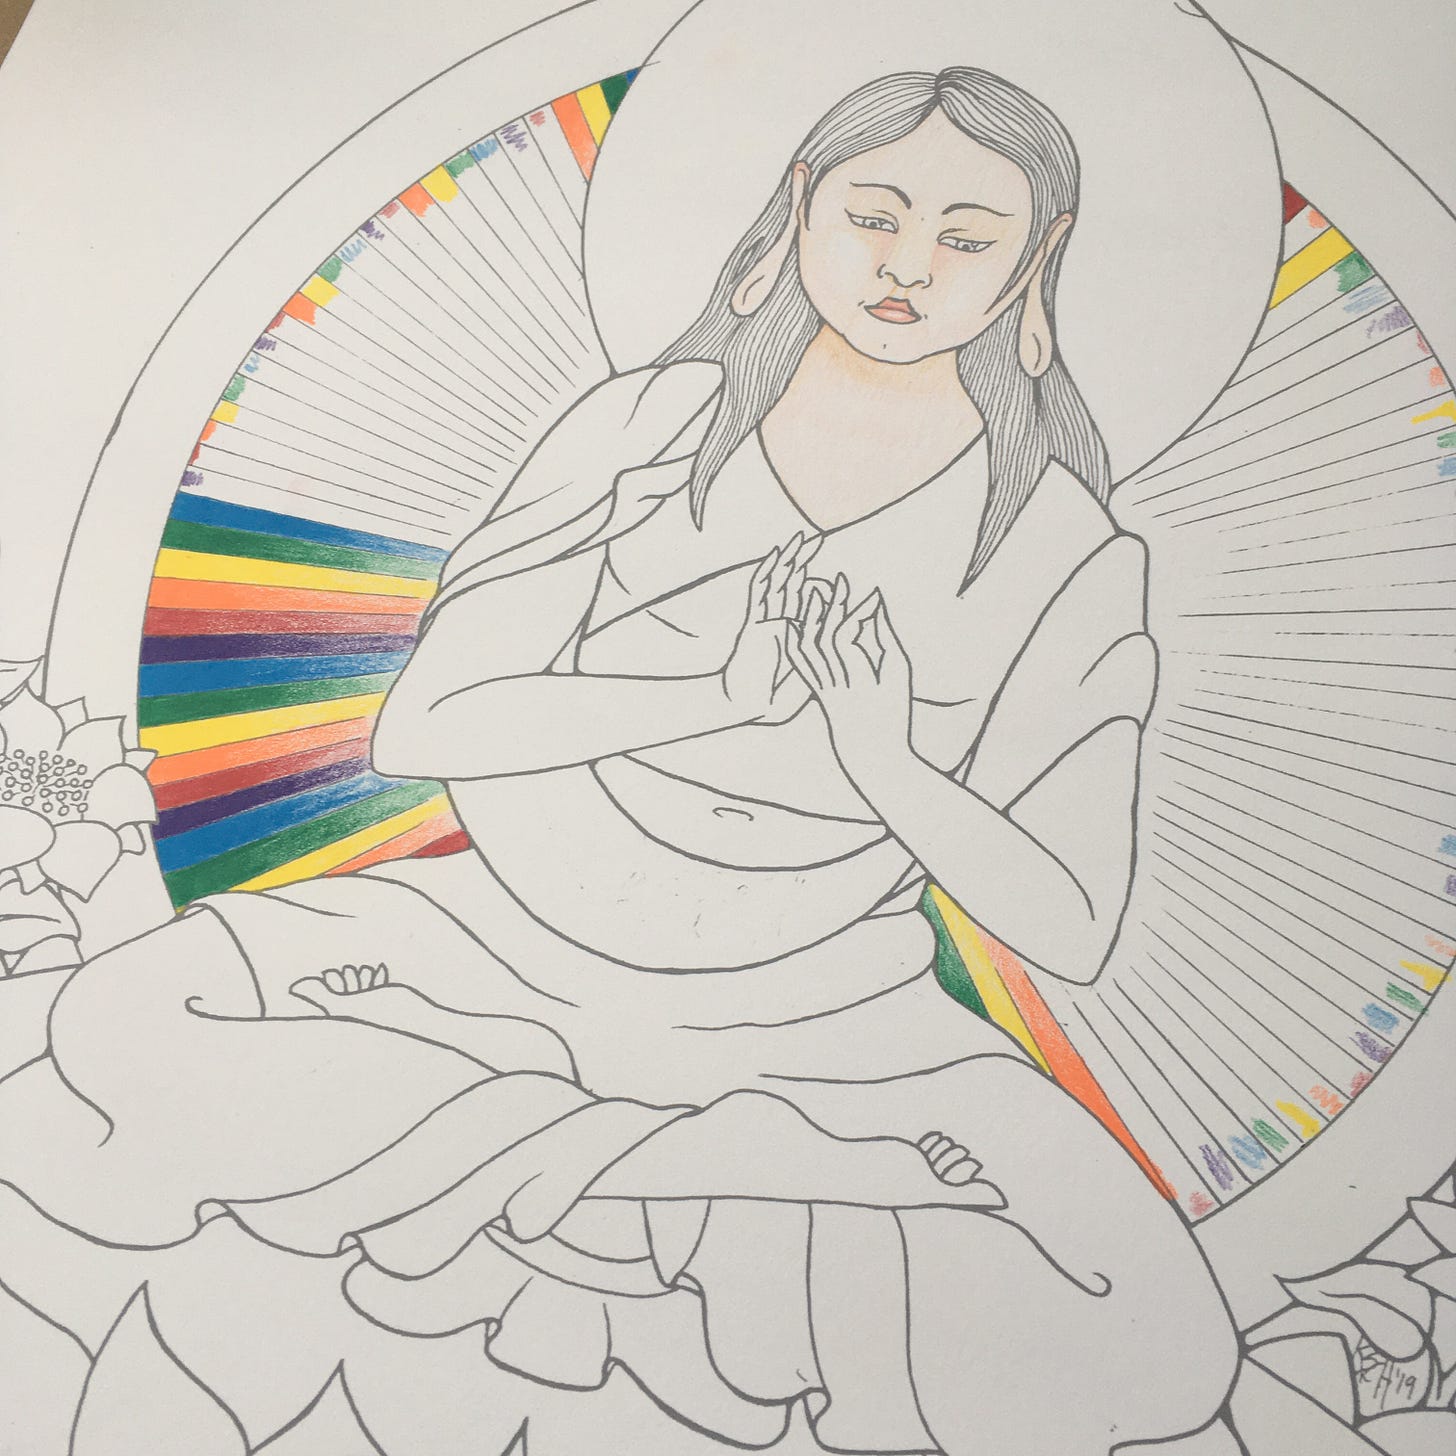 Photo of the progress of colouring in the radiance lines behind a drawing of the Buddha Vairochana. Vairochana is depicted as a soft, round Korean woman with long hair just passed shoulder length, sitting cross-legged with her hands in the bodhyagri mudra.